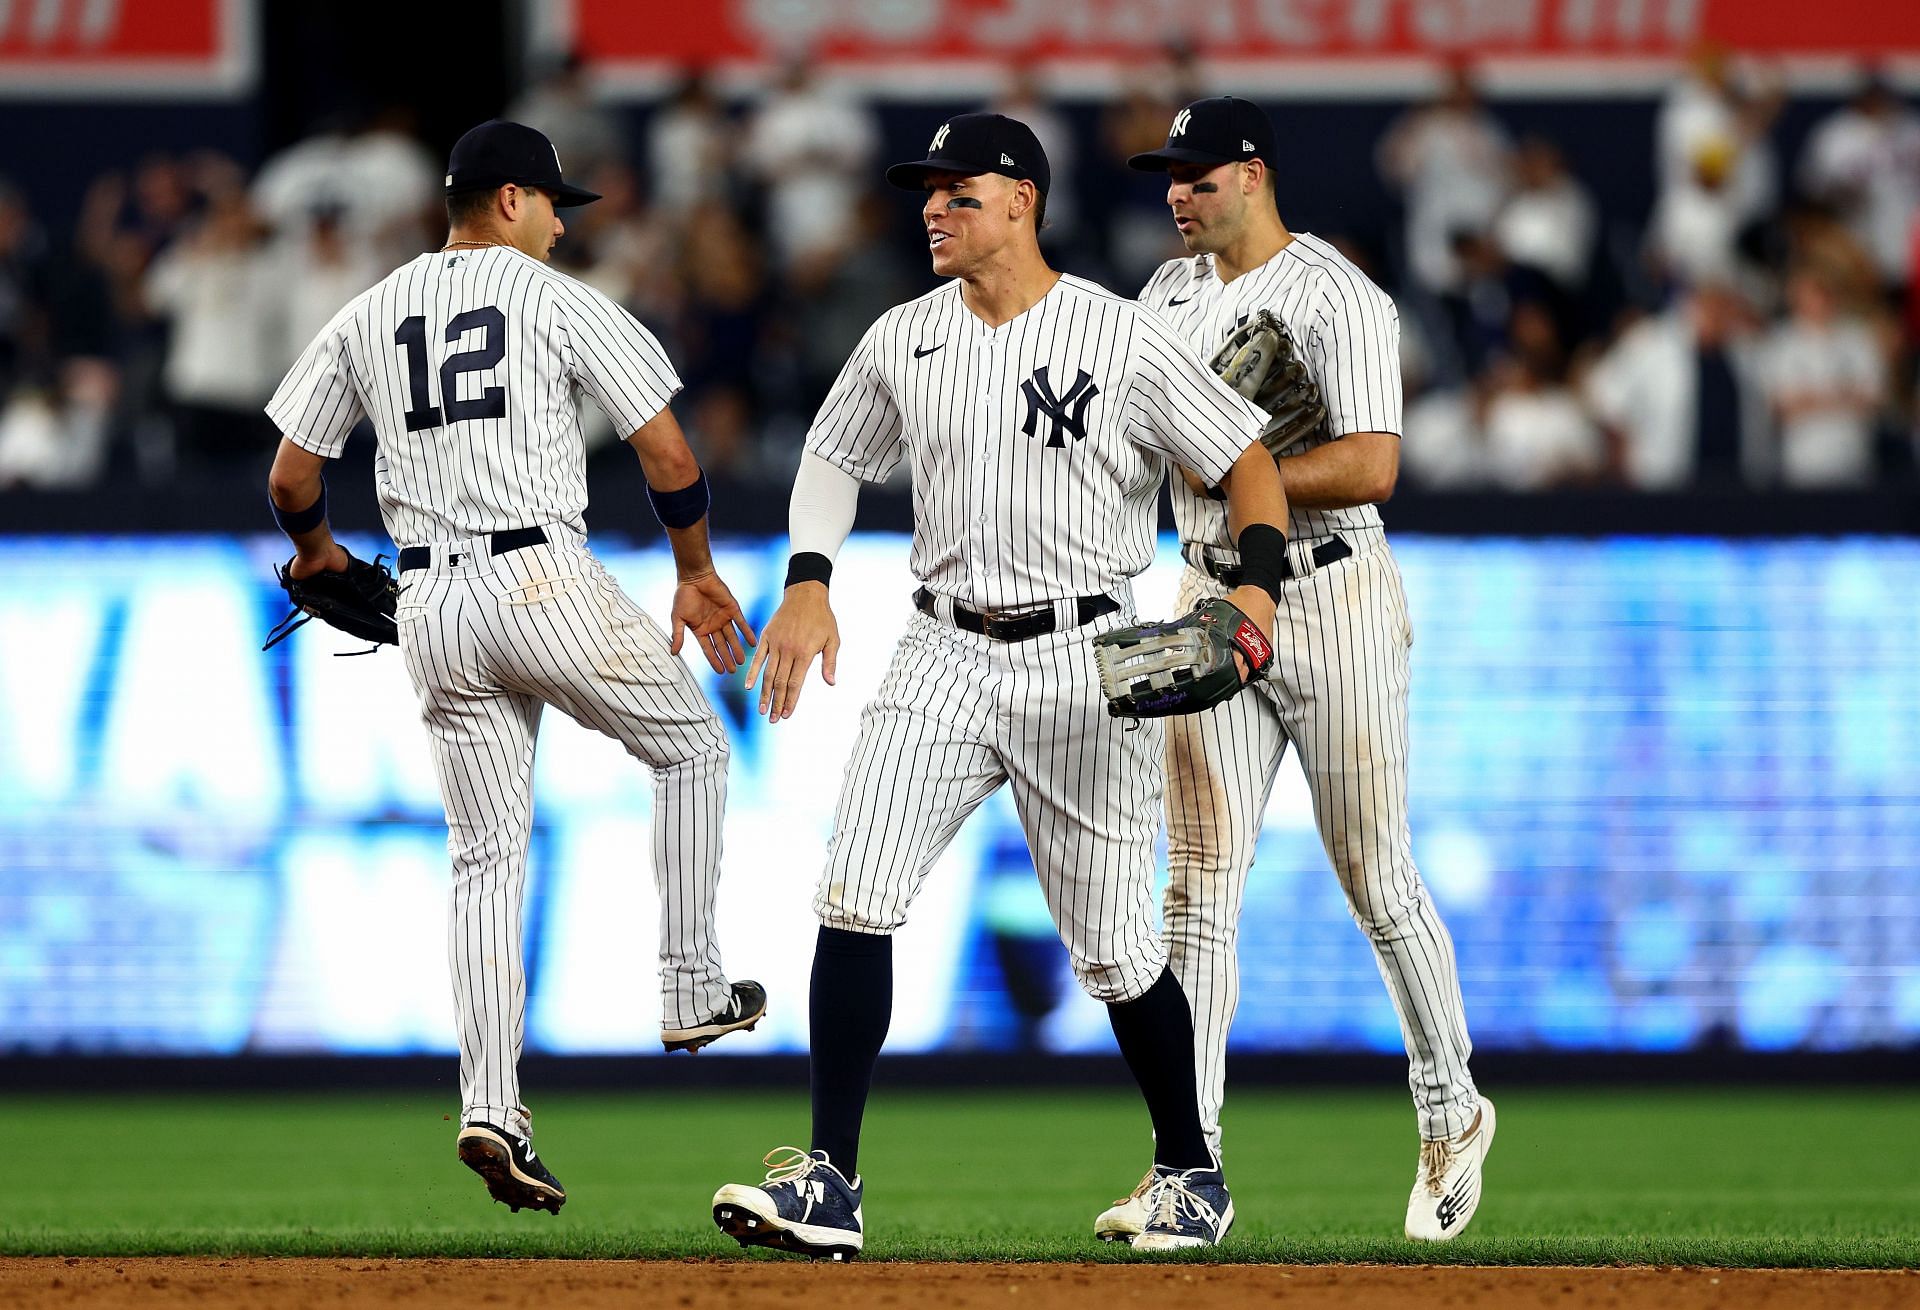 Isiah Kiner-Falefa #12, Aaron Judge #99 and Joey Gallo #13 of the New York Yankees celebrate the win over the Los Angeles Angels at Yankee Stadium on May 31, 2022 in the Bronx borough of New York City. The New York Yankees defeated the Los Angeles Angels 9-1.